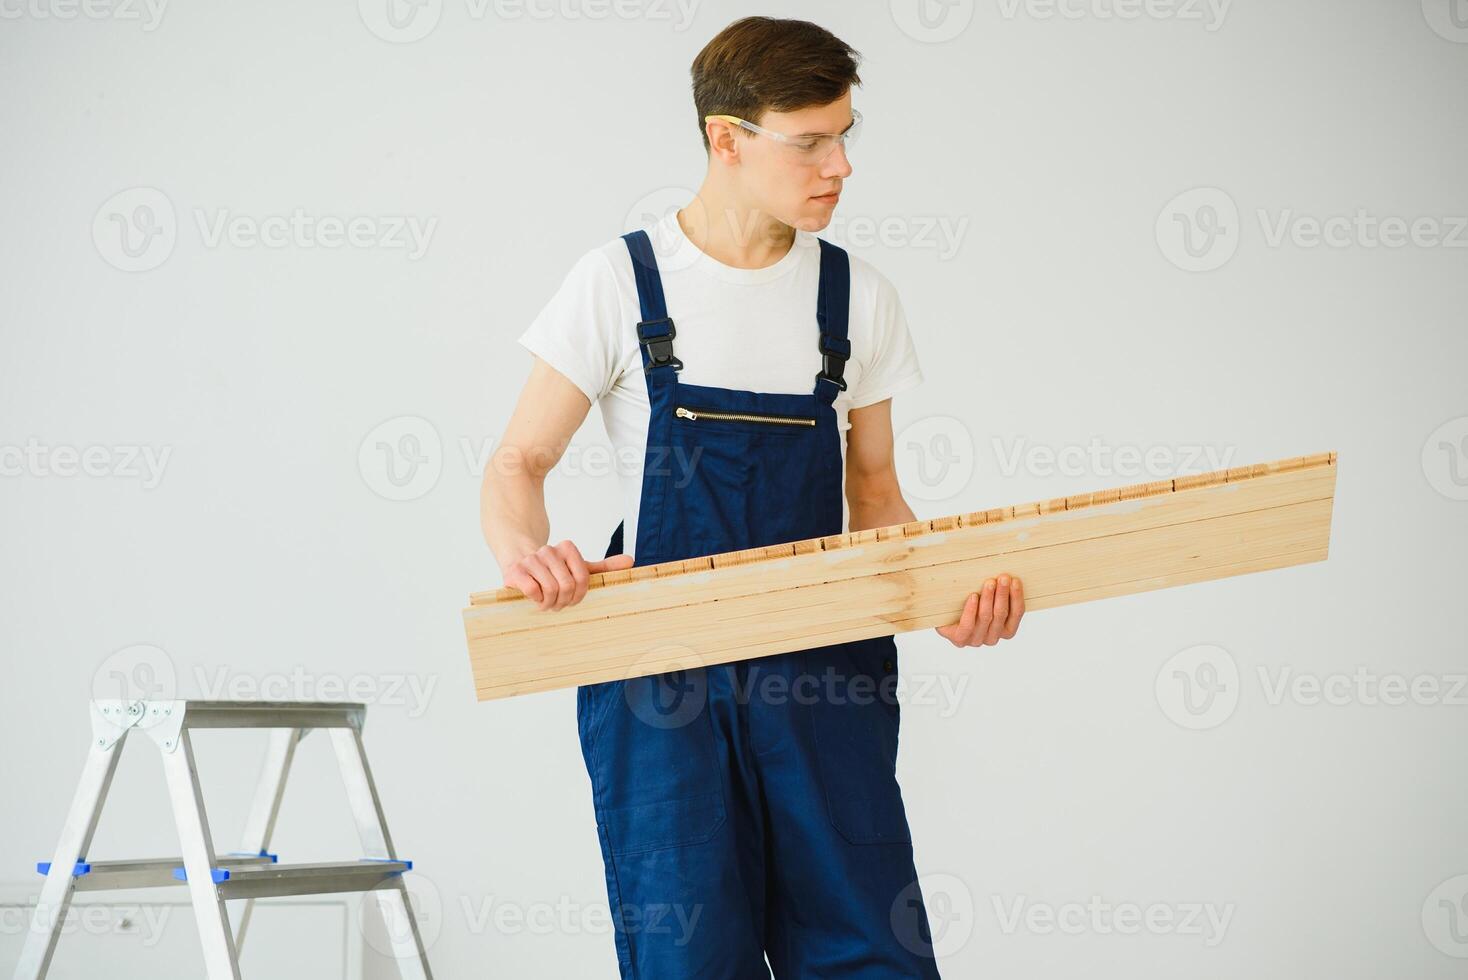 Worker with materials for installing laminate flooring photo